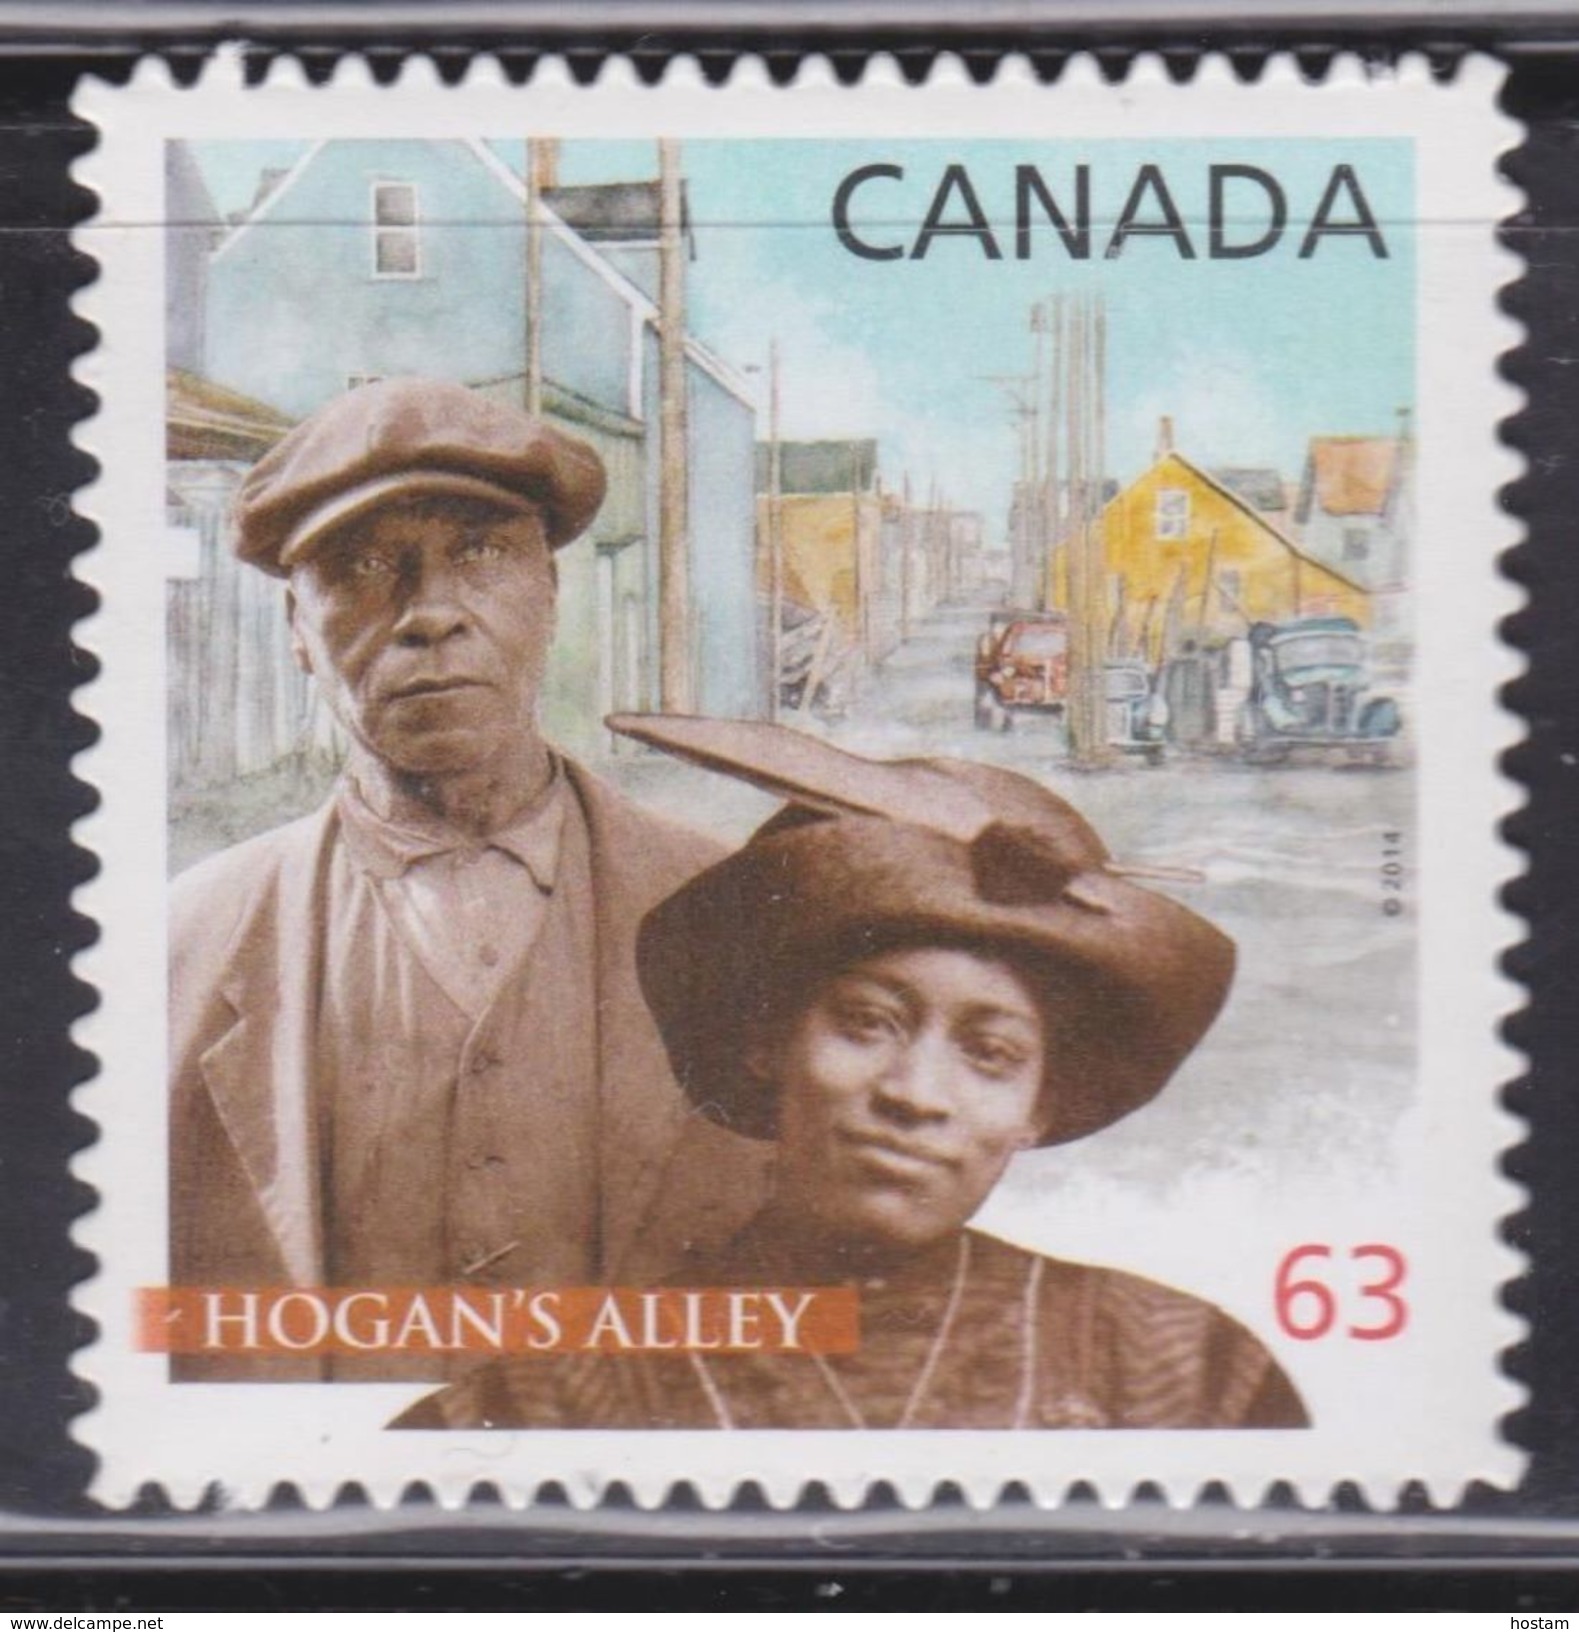 CANADA, 2014, #2703i,  BLACK HISTORY: HOGAN'ALLEY, VANCOUVER,  COUPLE  BUILDINGS, MNH DIE CUT FROM QUARTELY PACK - Single Stamps